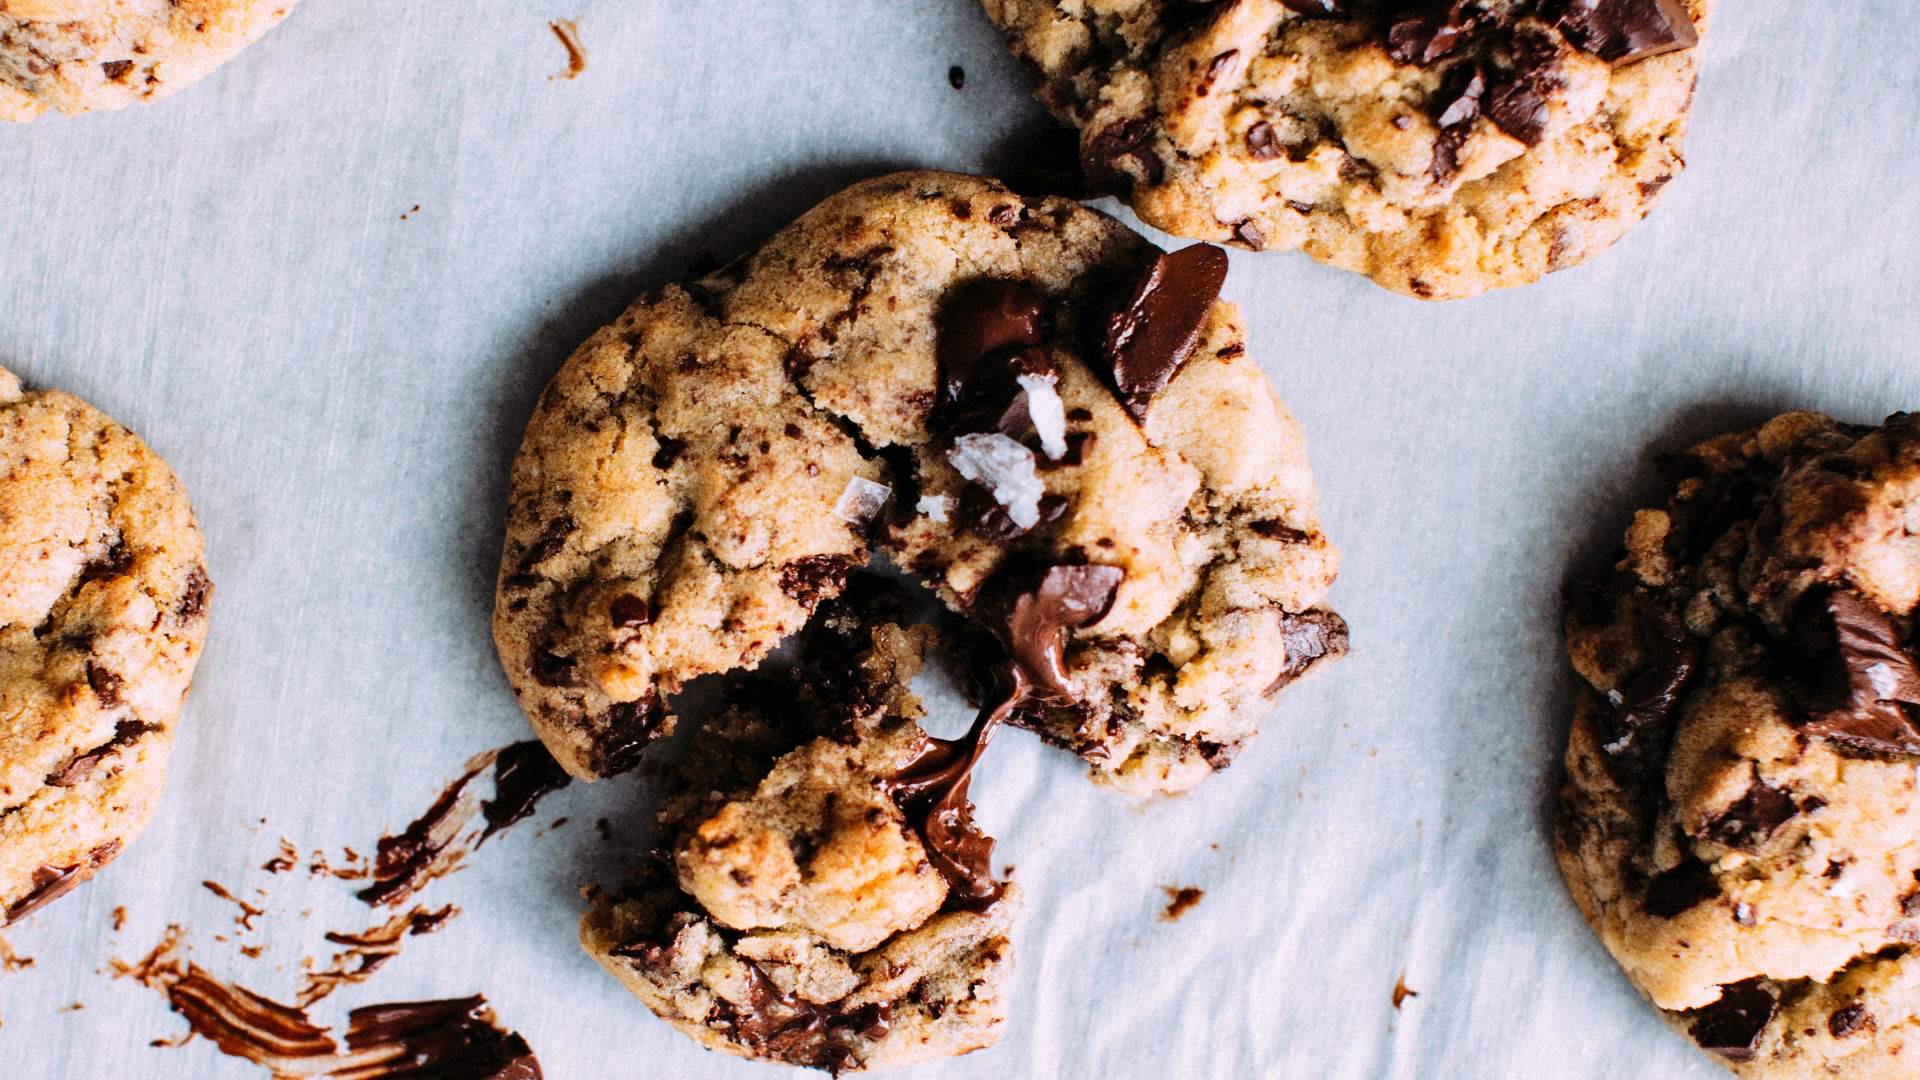 Here's Where You Can Pick Up the Best Cookie Dough for Your Next Baking Session